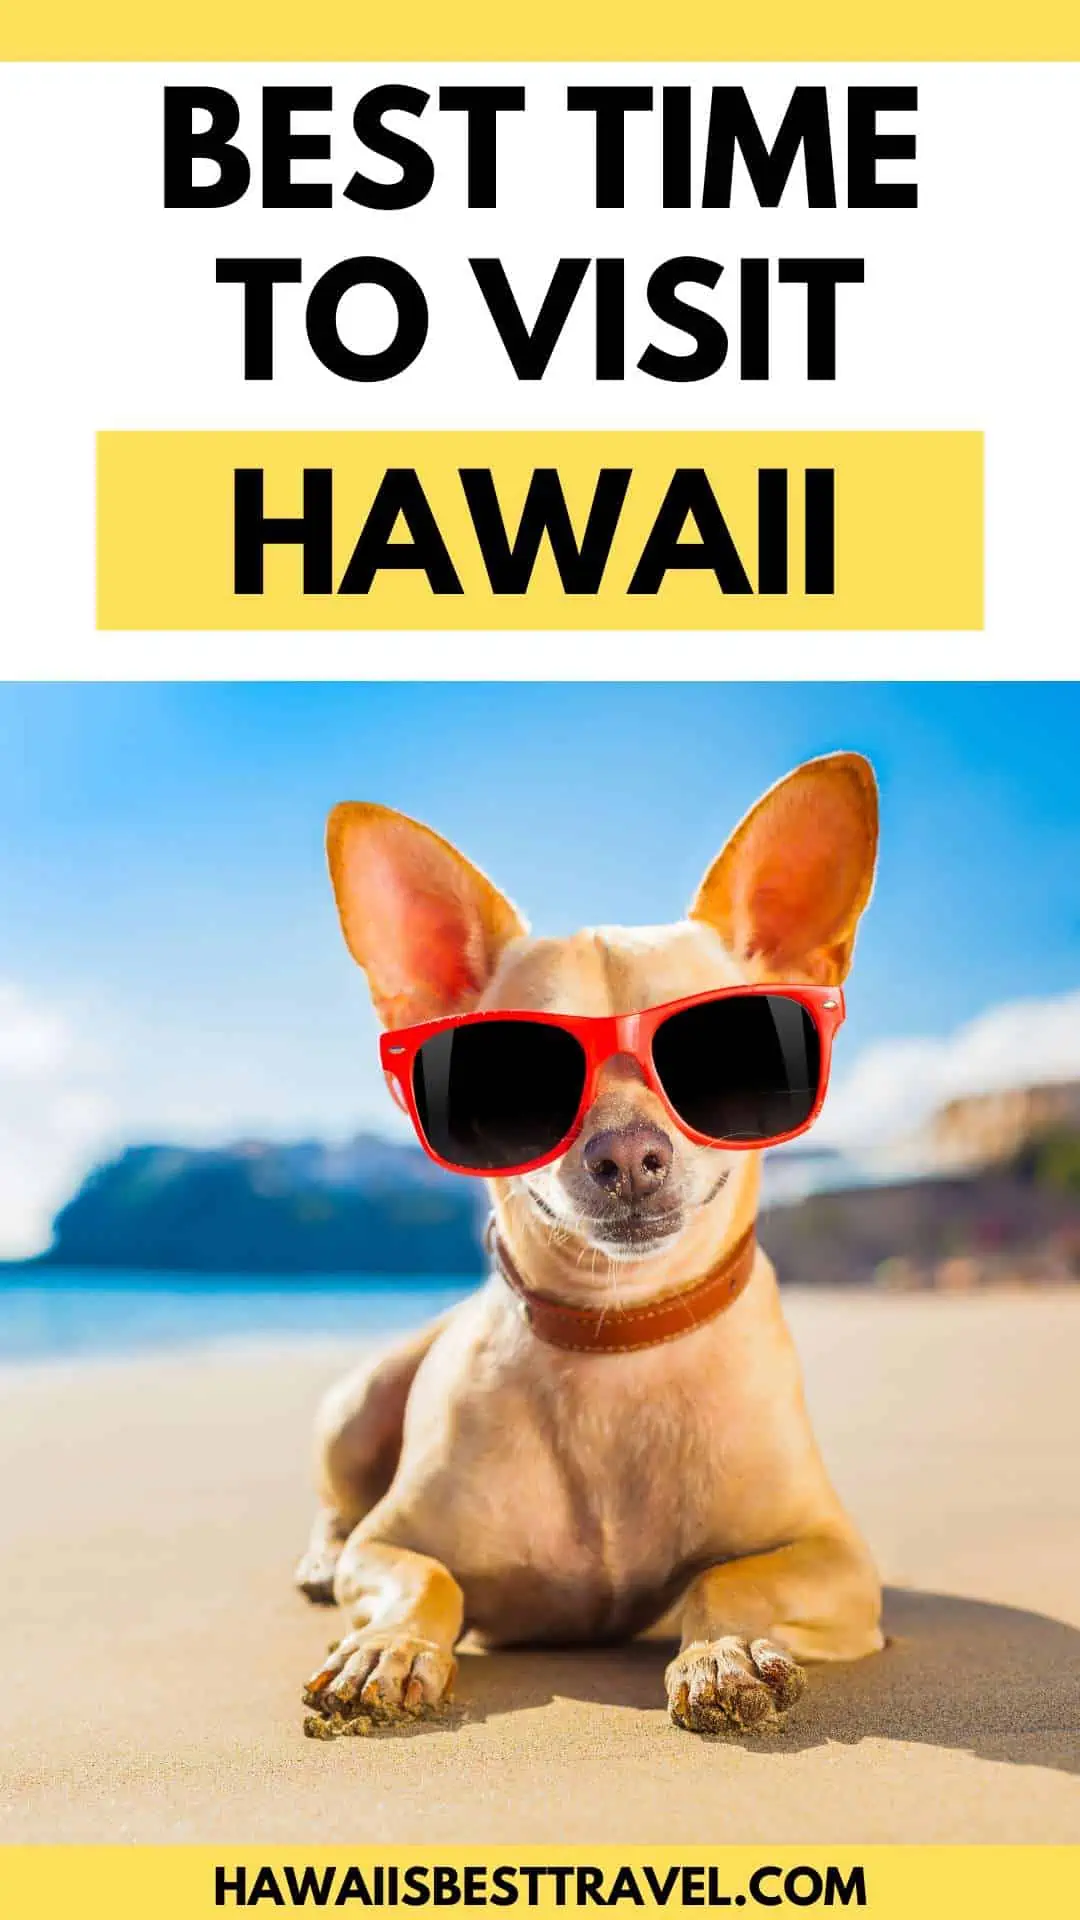 best time to visit hawaii - pin